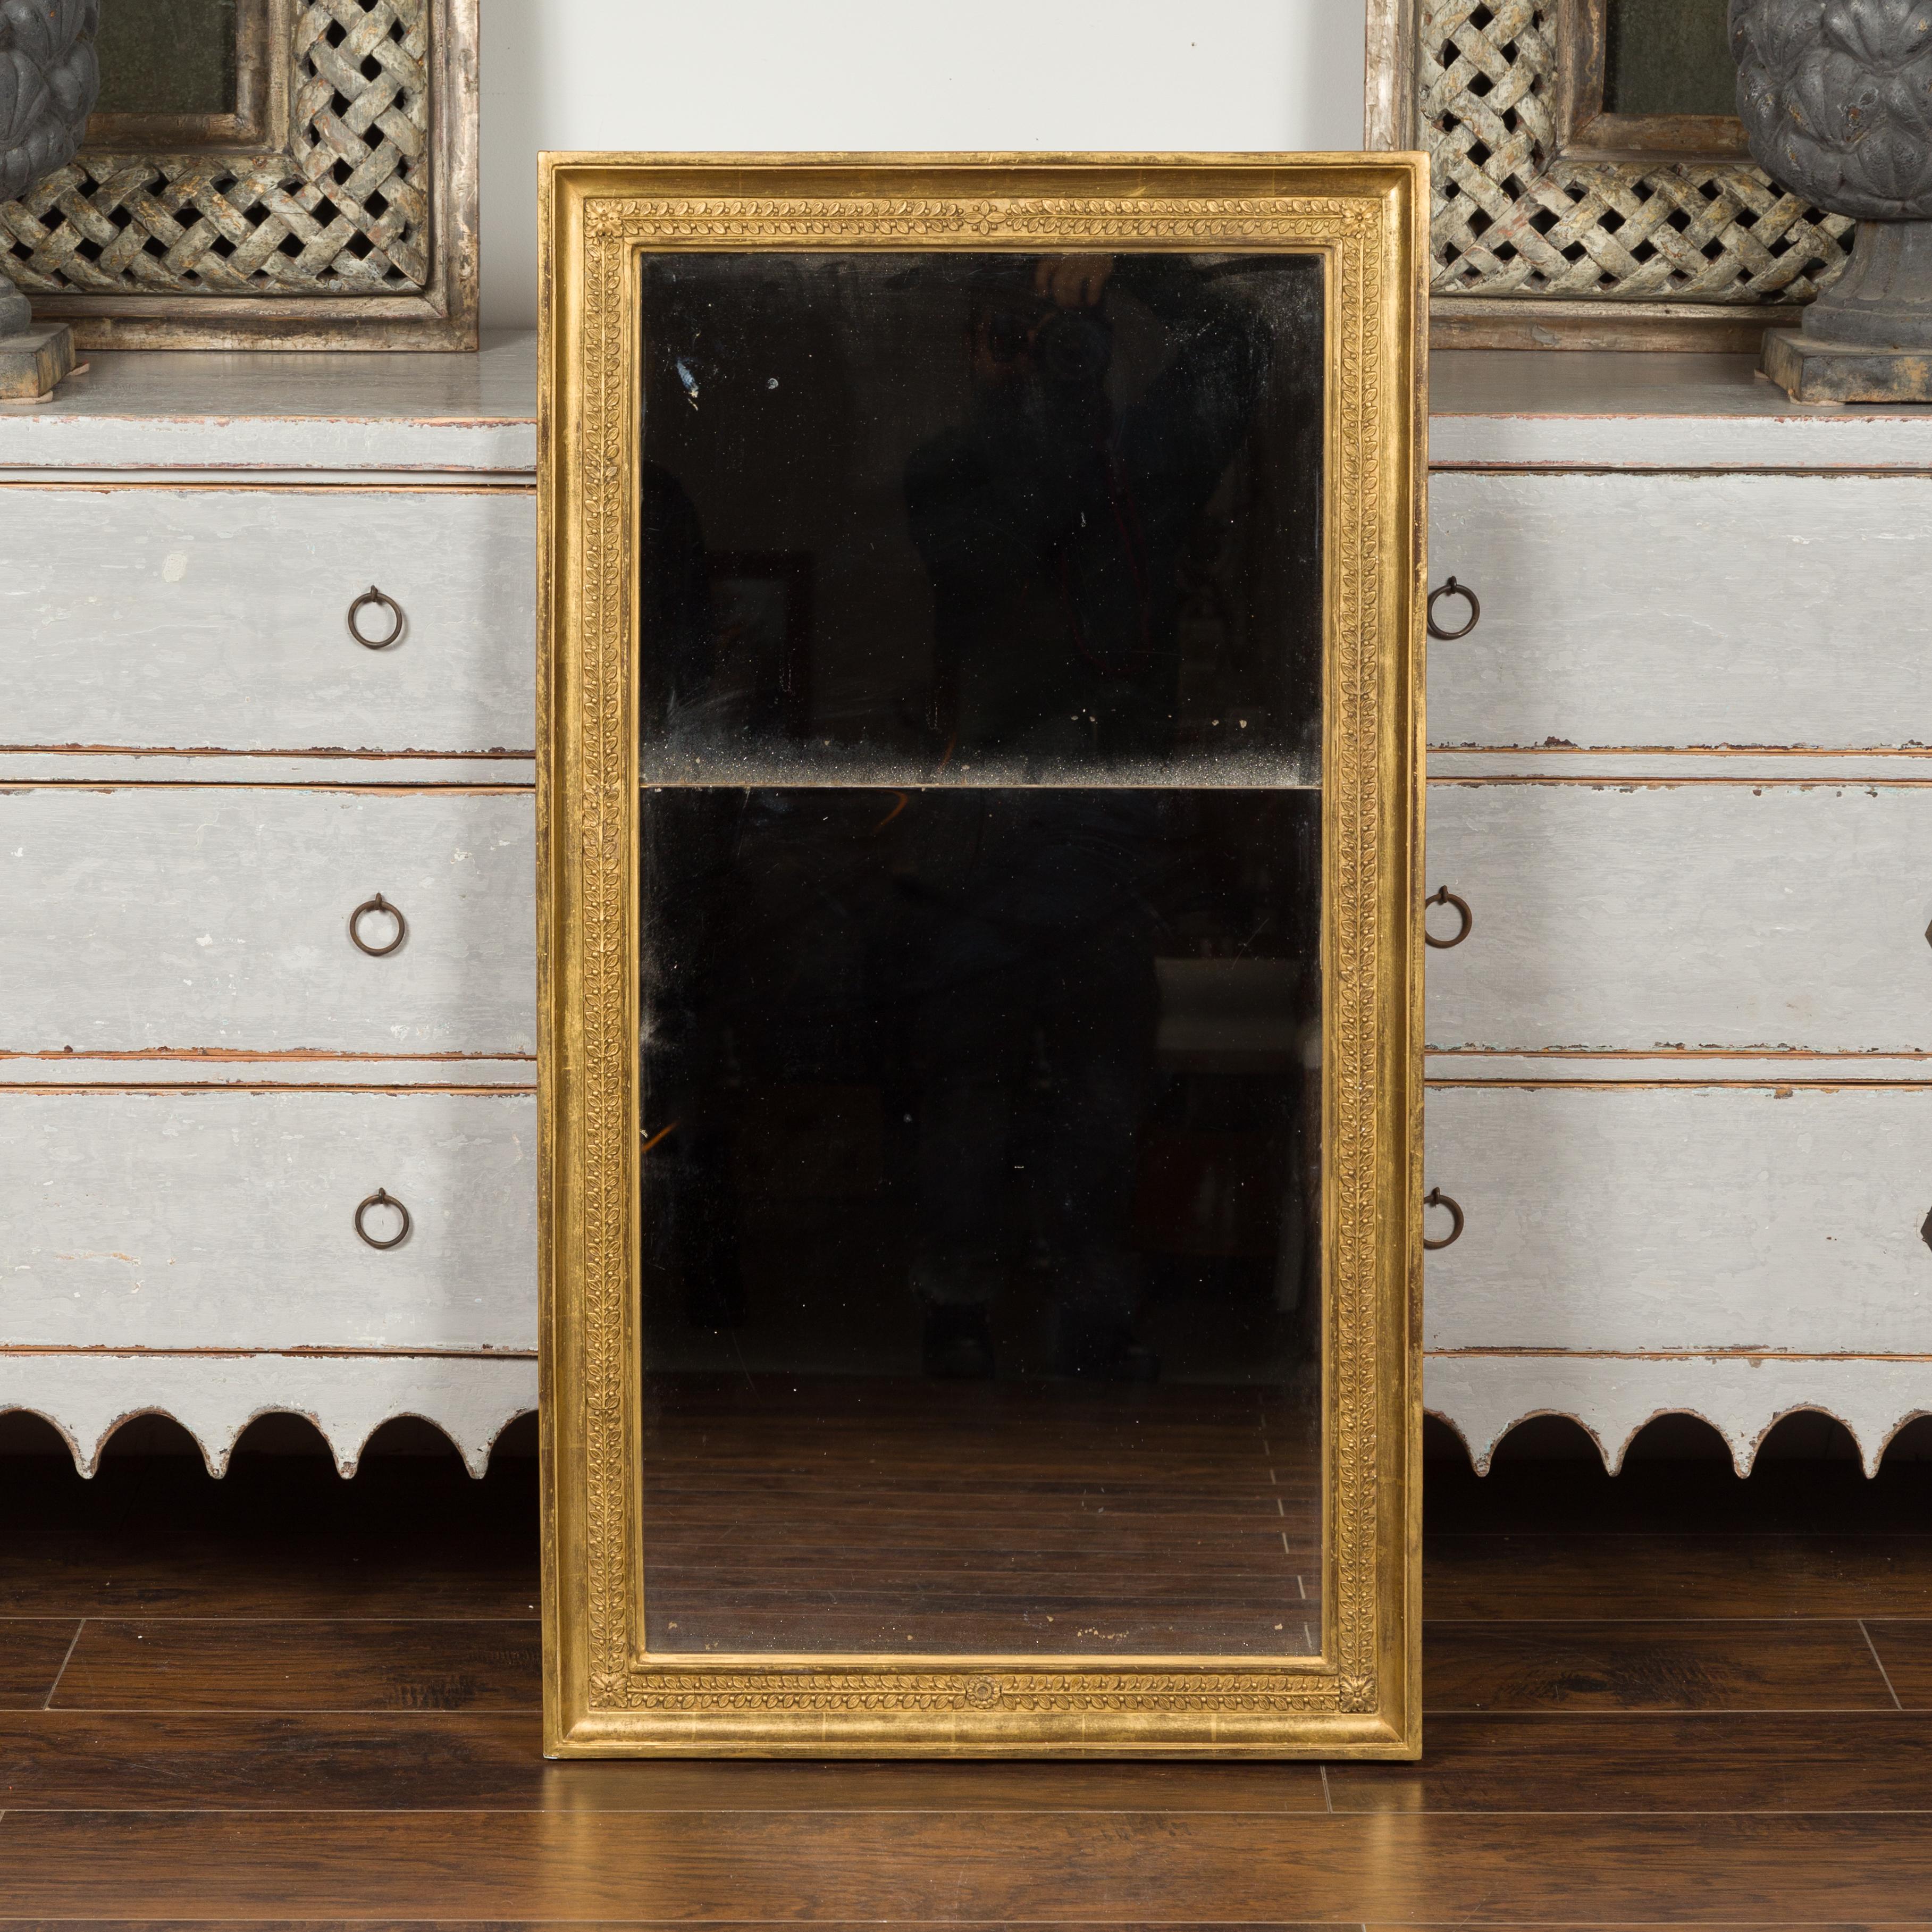 A French giltwood split glass mirror from the turn of the century, with foliage and rosette motifs. Created in France at the turn of the 19th to 20th century, this split glass mirror features a giltwood frame, adorned with delicately carved foliage